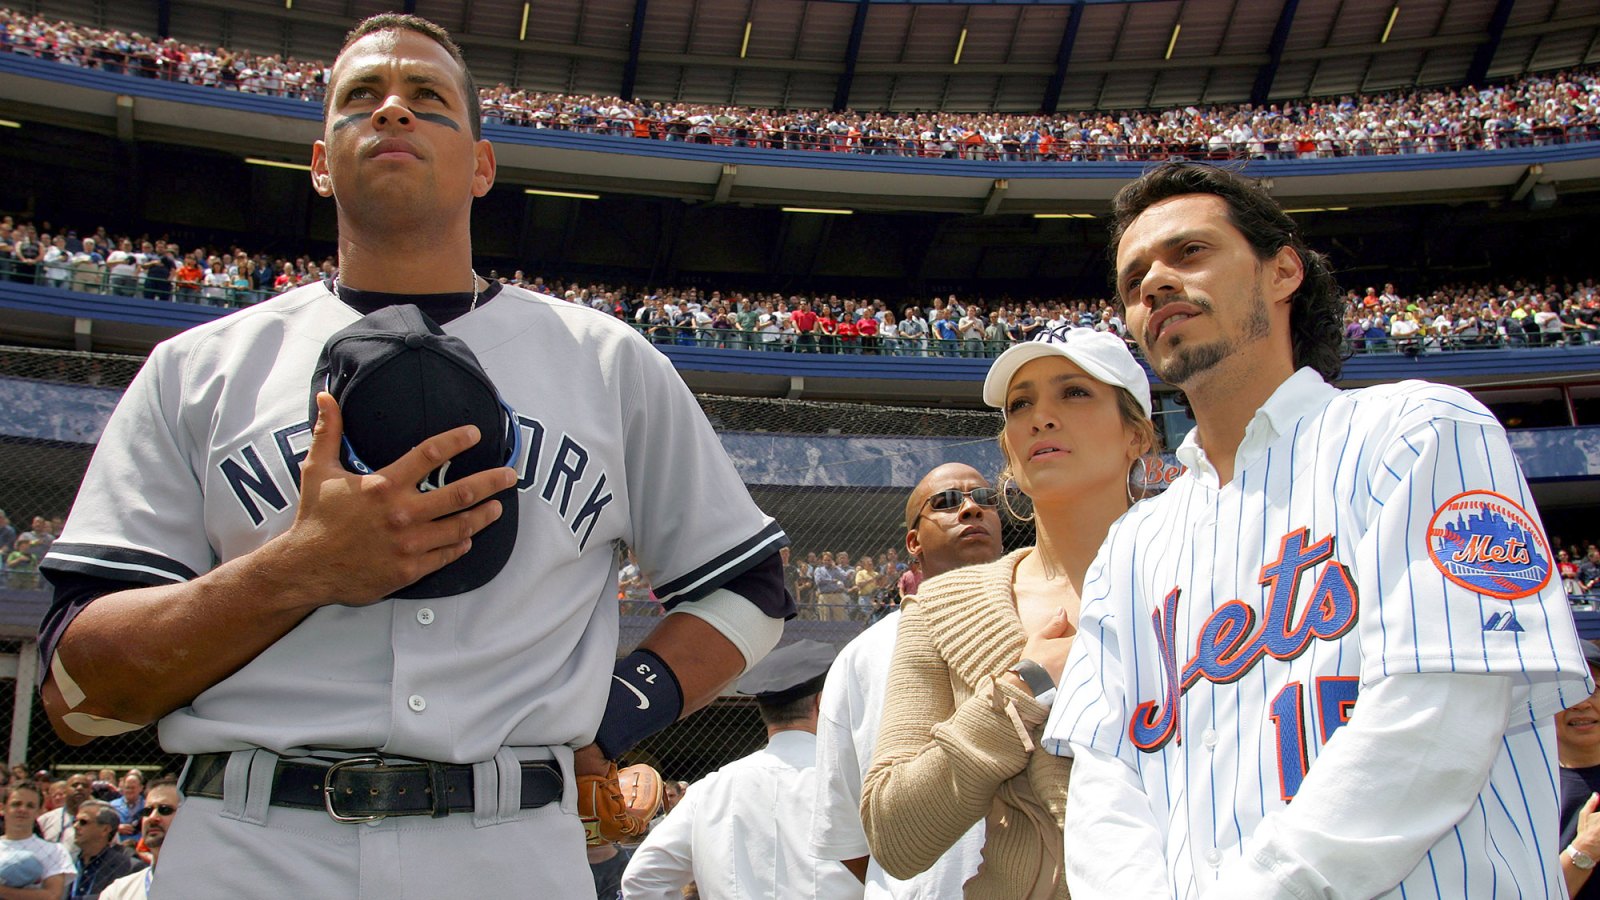 Old Photo of J. Lo, A-Rod and Marc Becomes Meme After Engagement